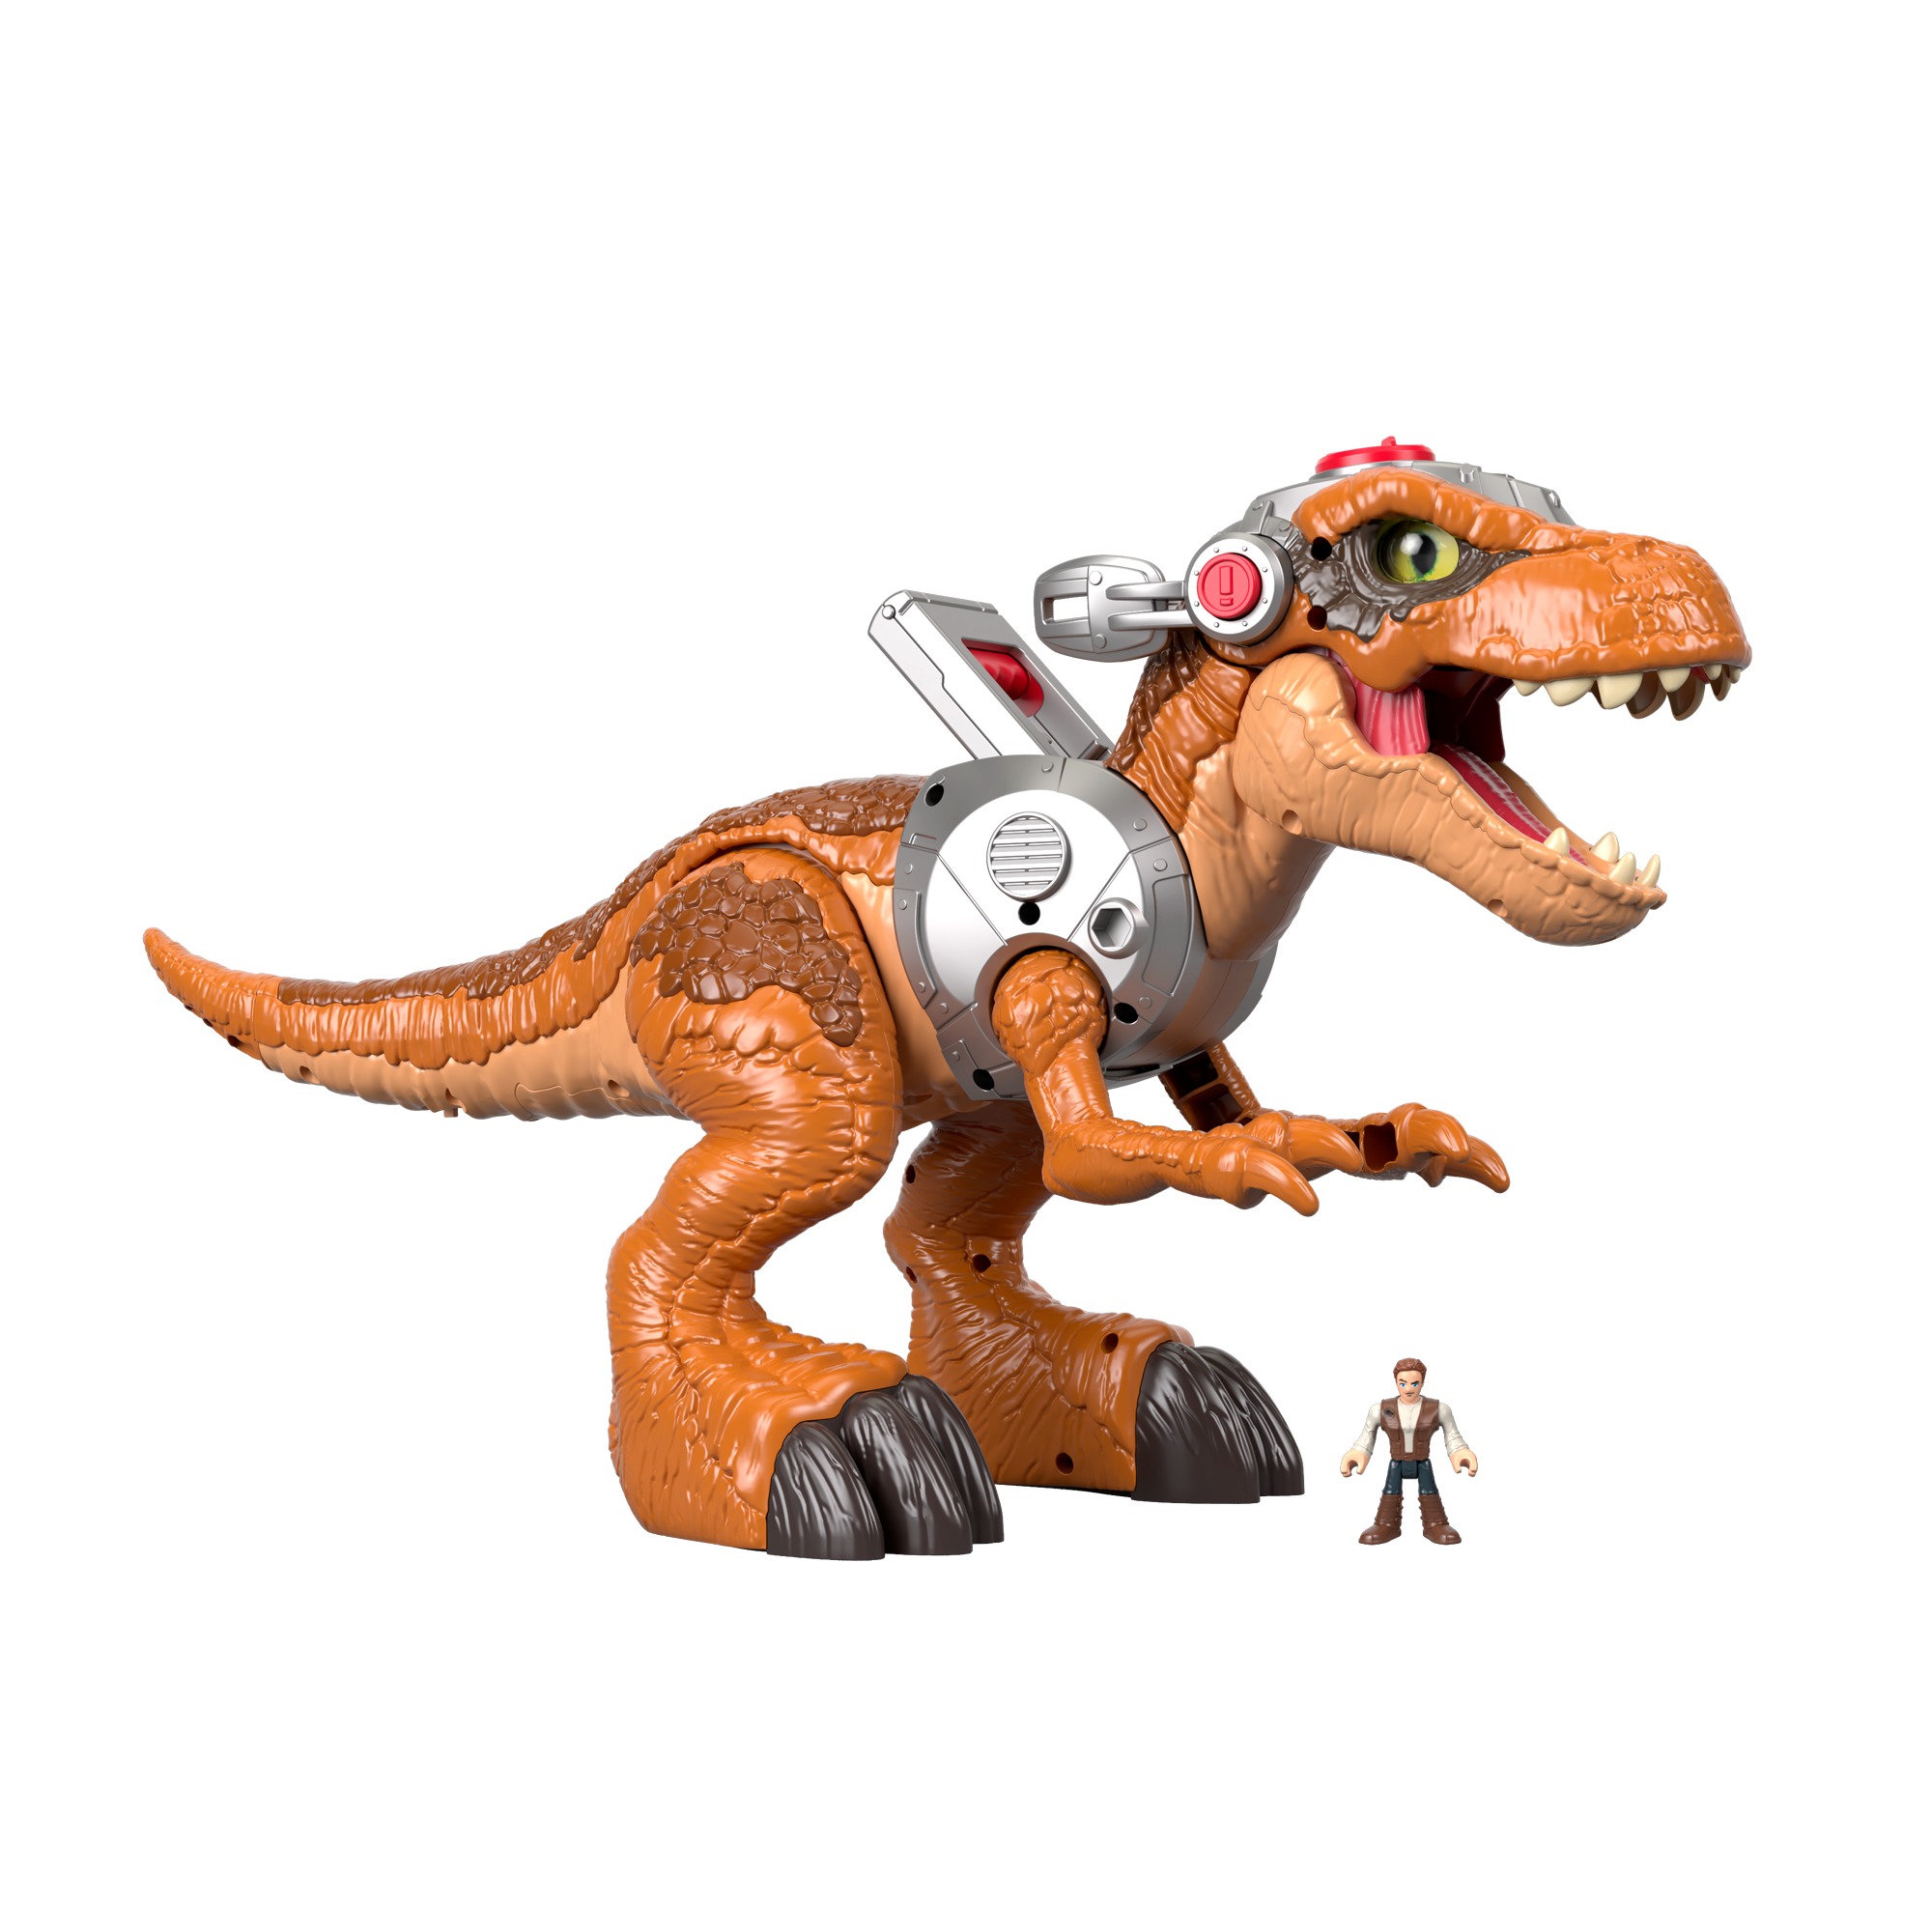 Imaginext Jurassic World MEGA T-Rex with Lights and Sounds - image 2 of 6